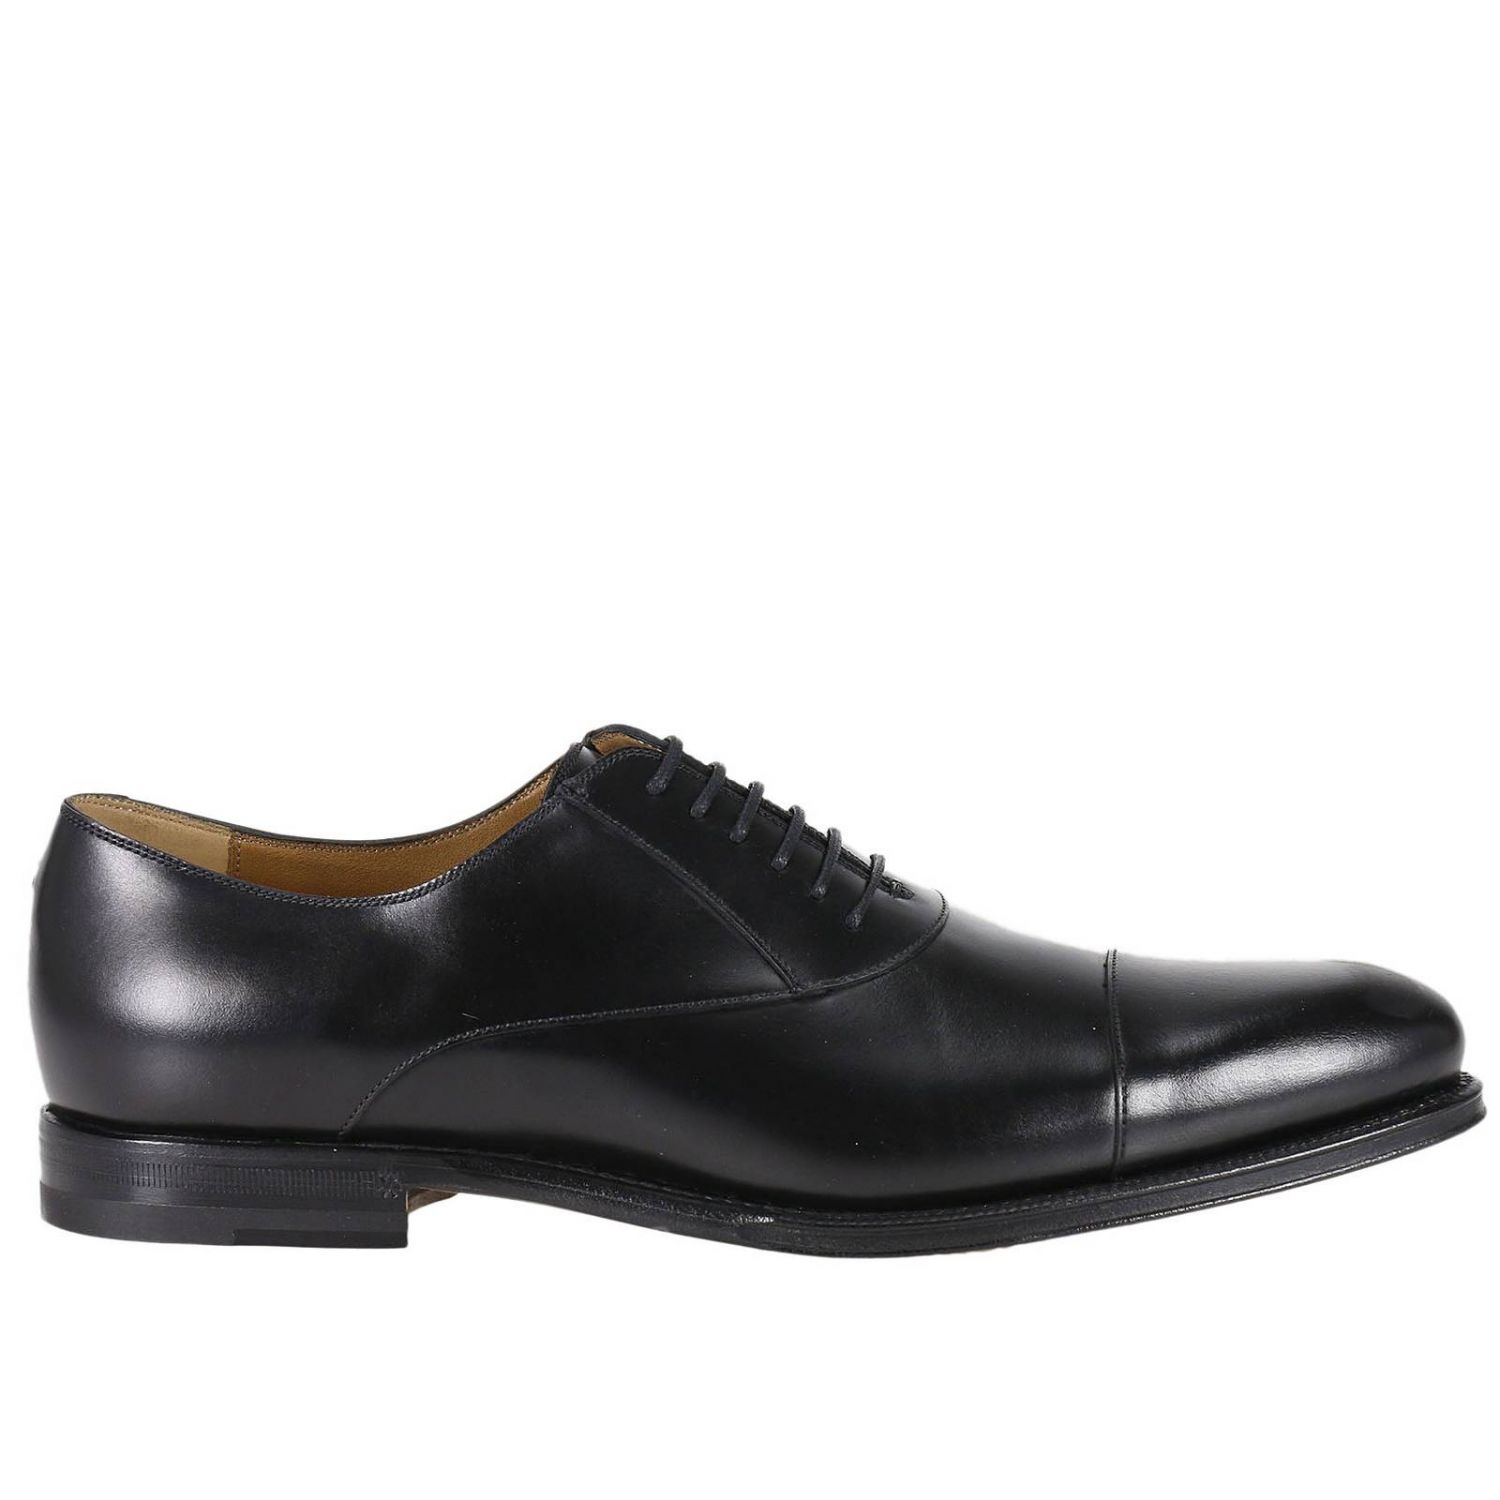 GUCCI: Smooth Spirit Oxford Shoes with elongated toe | Brogue Shoes ...